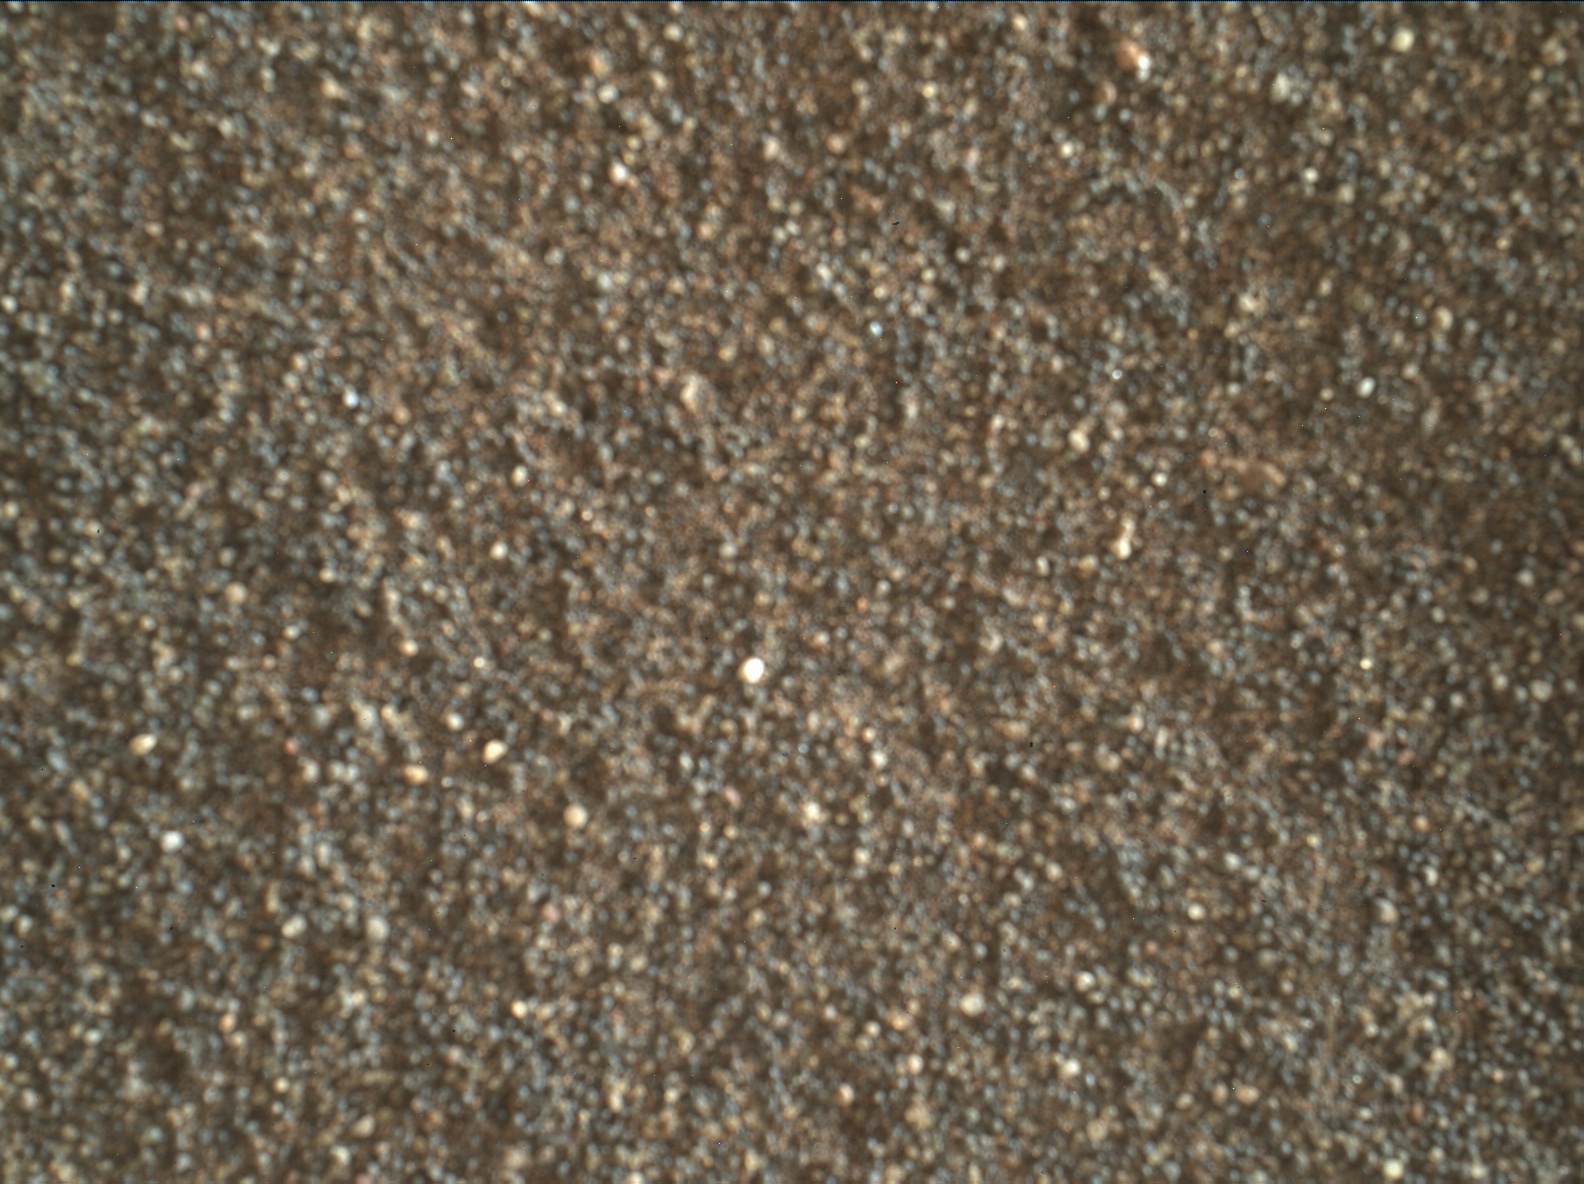 Nasa's Mars rover Curiosity acquired this image using its Mars Hand Lens Imager (MAHLI) on Sol 2410